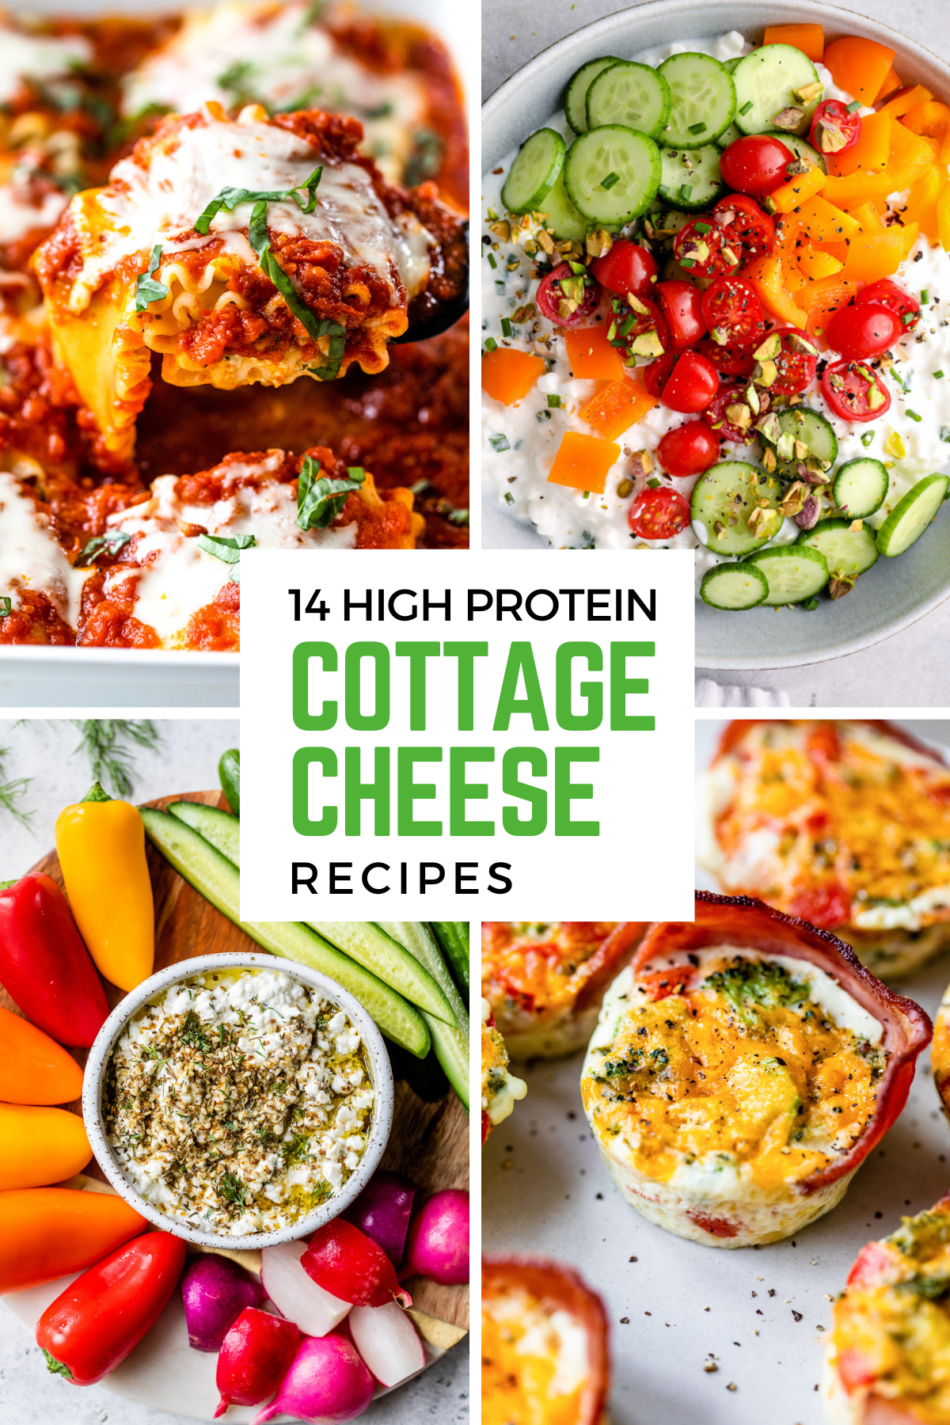 14 High Protein Cottage Cheese Recipes You Need to Try